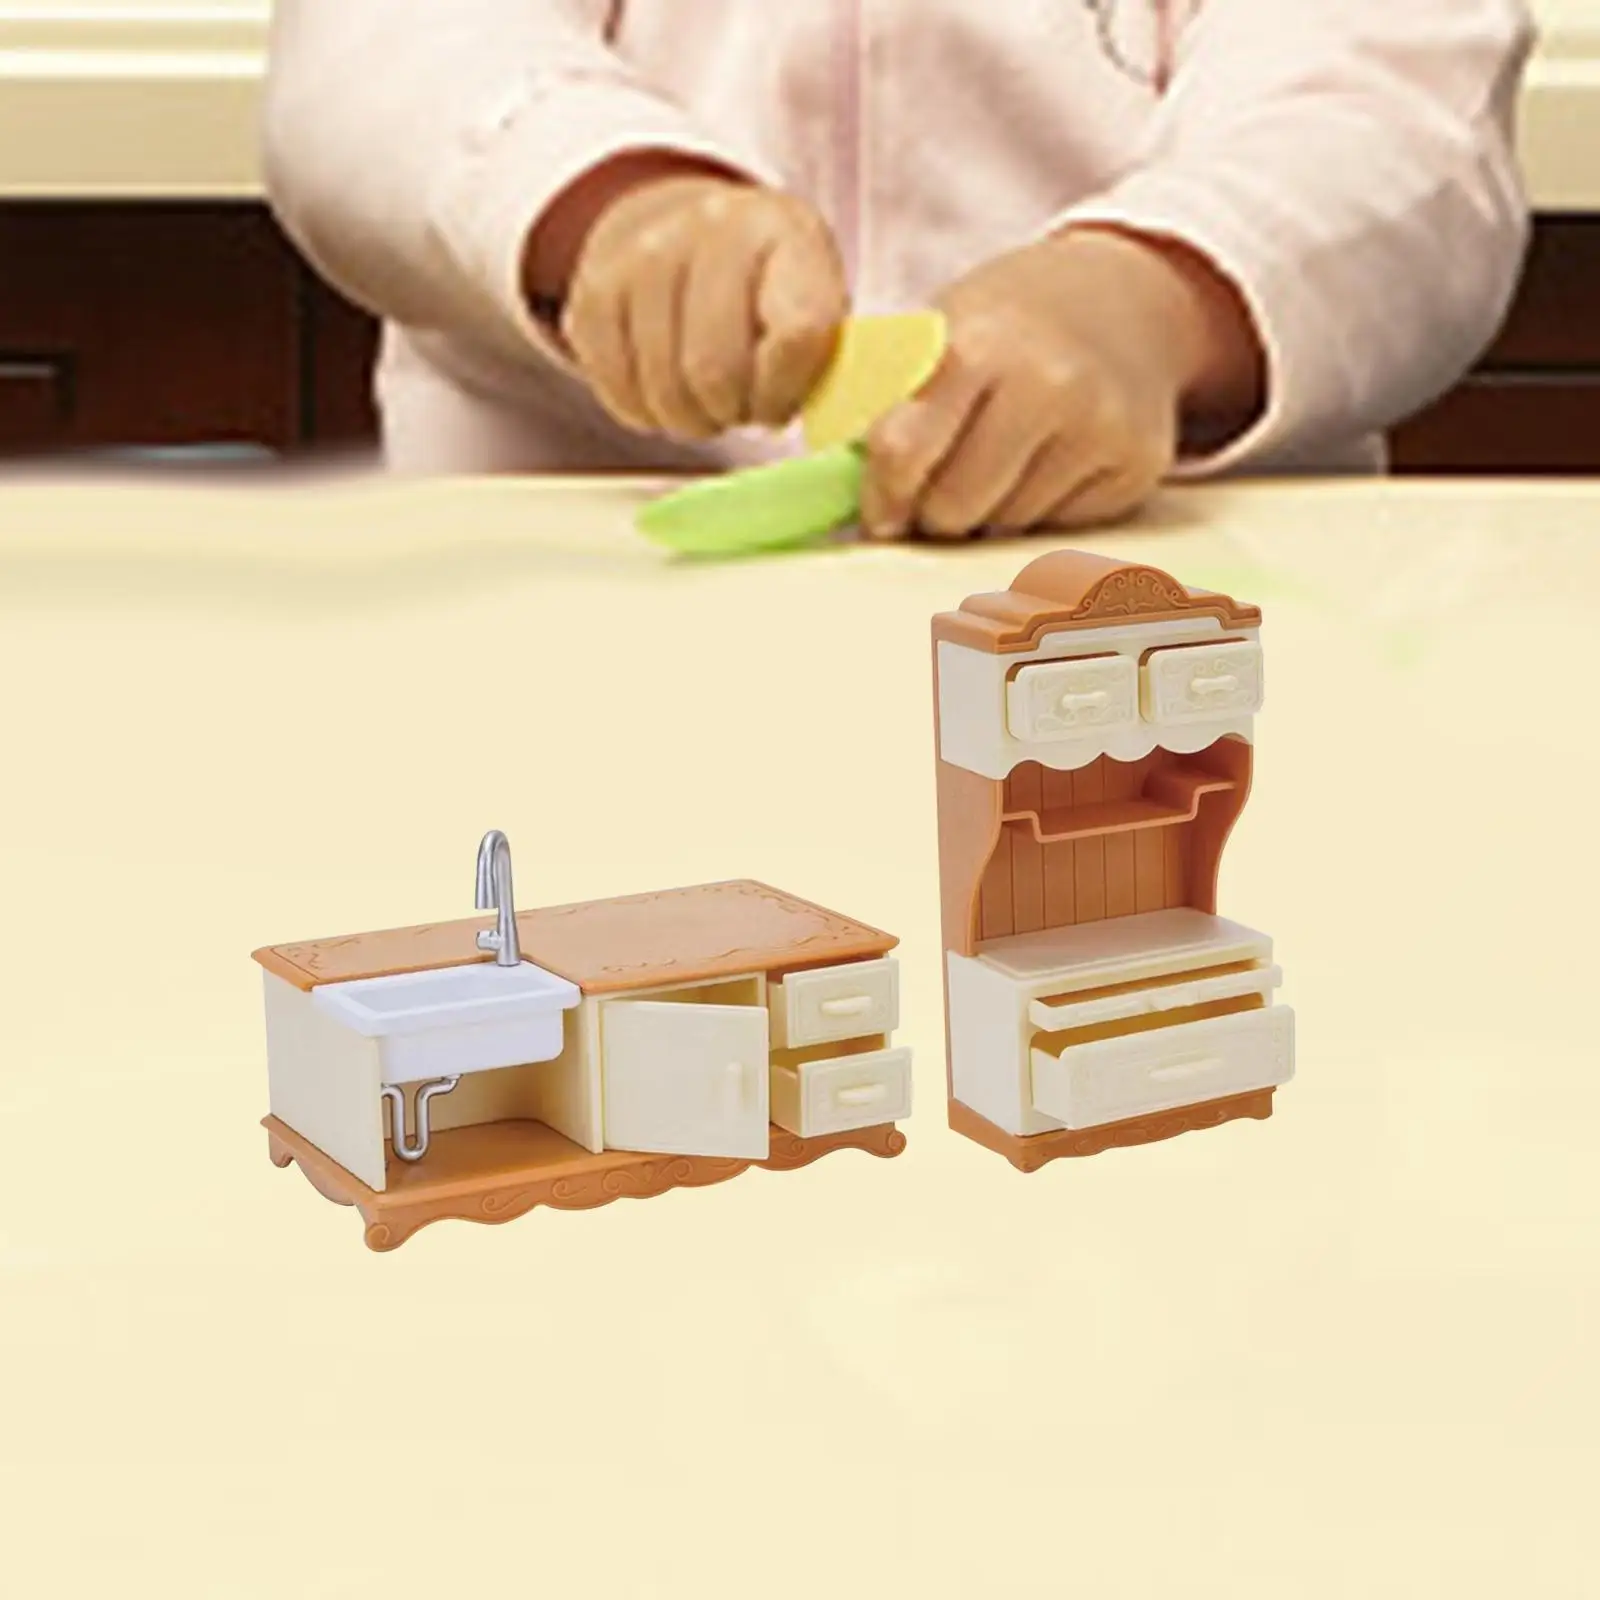 Simulation Dollhouse Mini Kitchen Scene ABS Toaster for Kids Toy Dollhouse Ornament